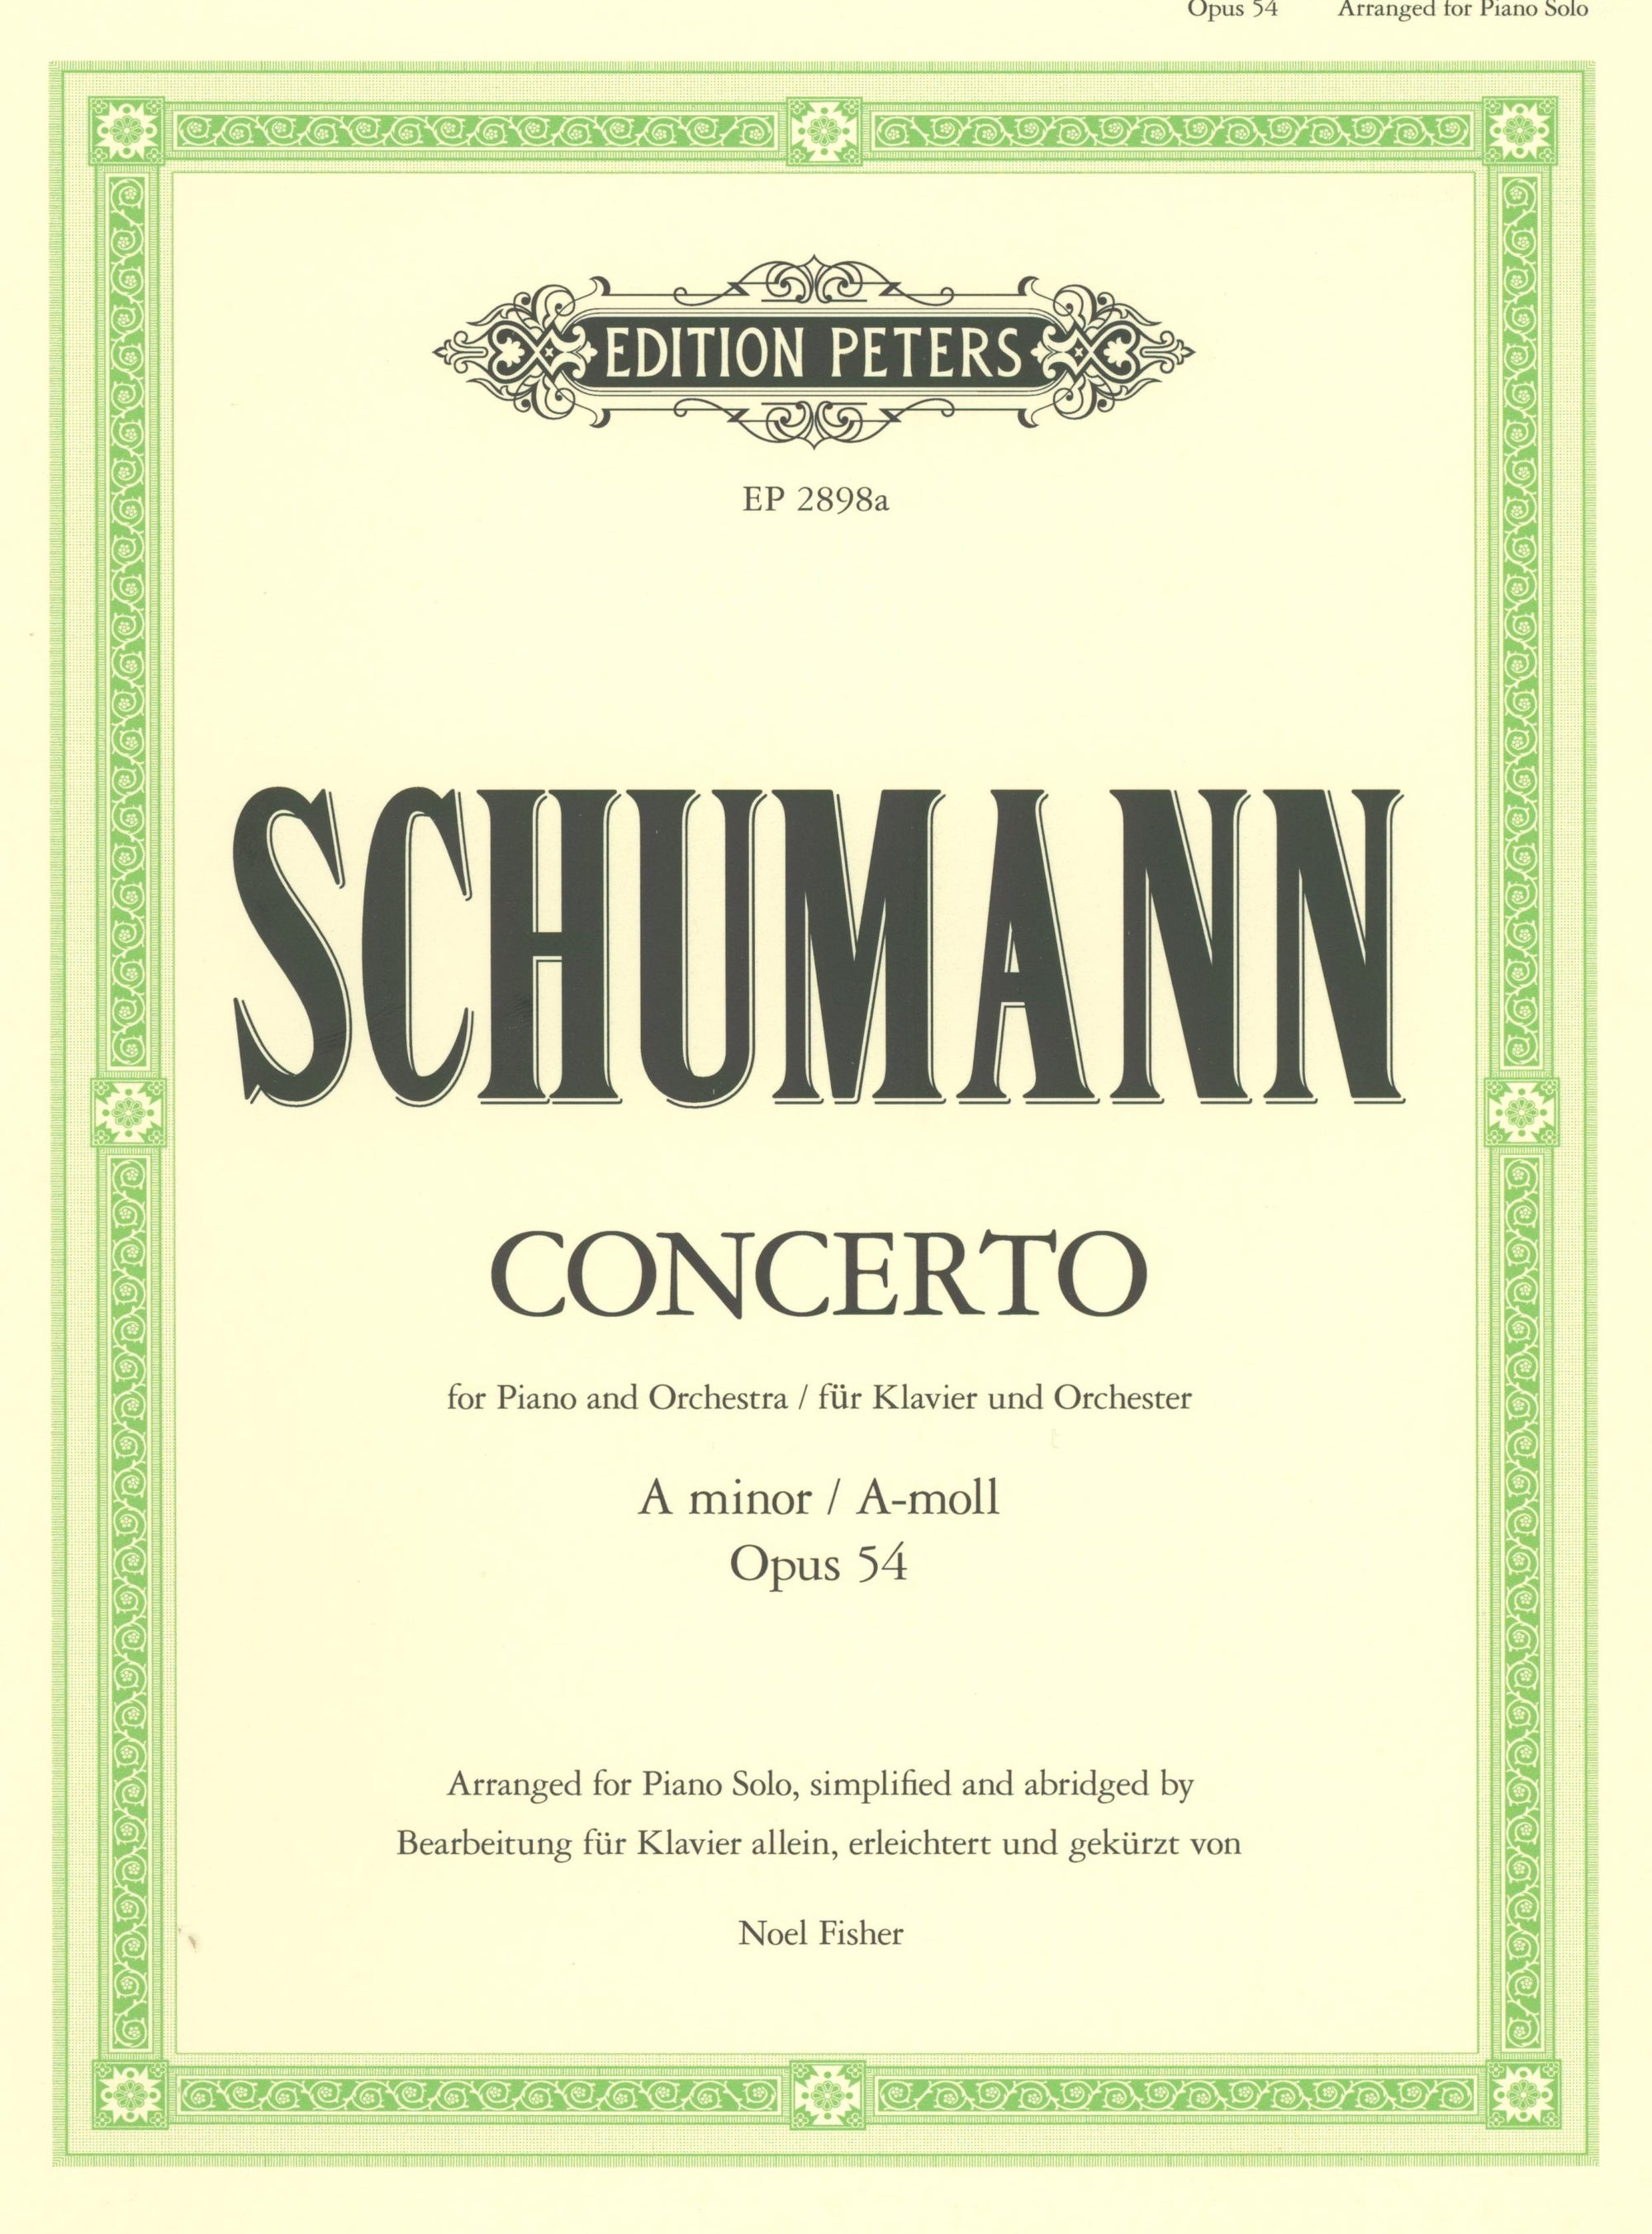 Schumann: Piano Concerto in A Minor, Op. 54 - arranged and abridged